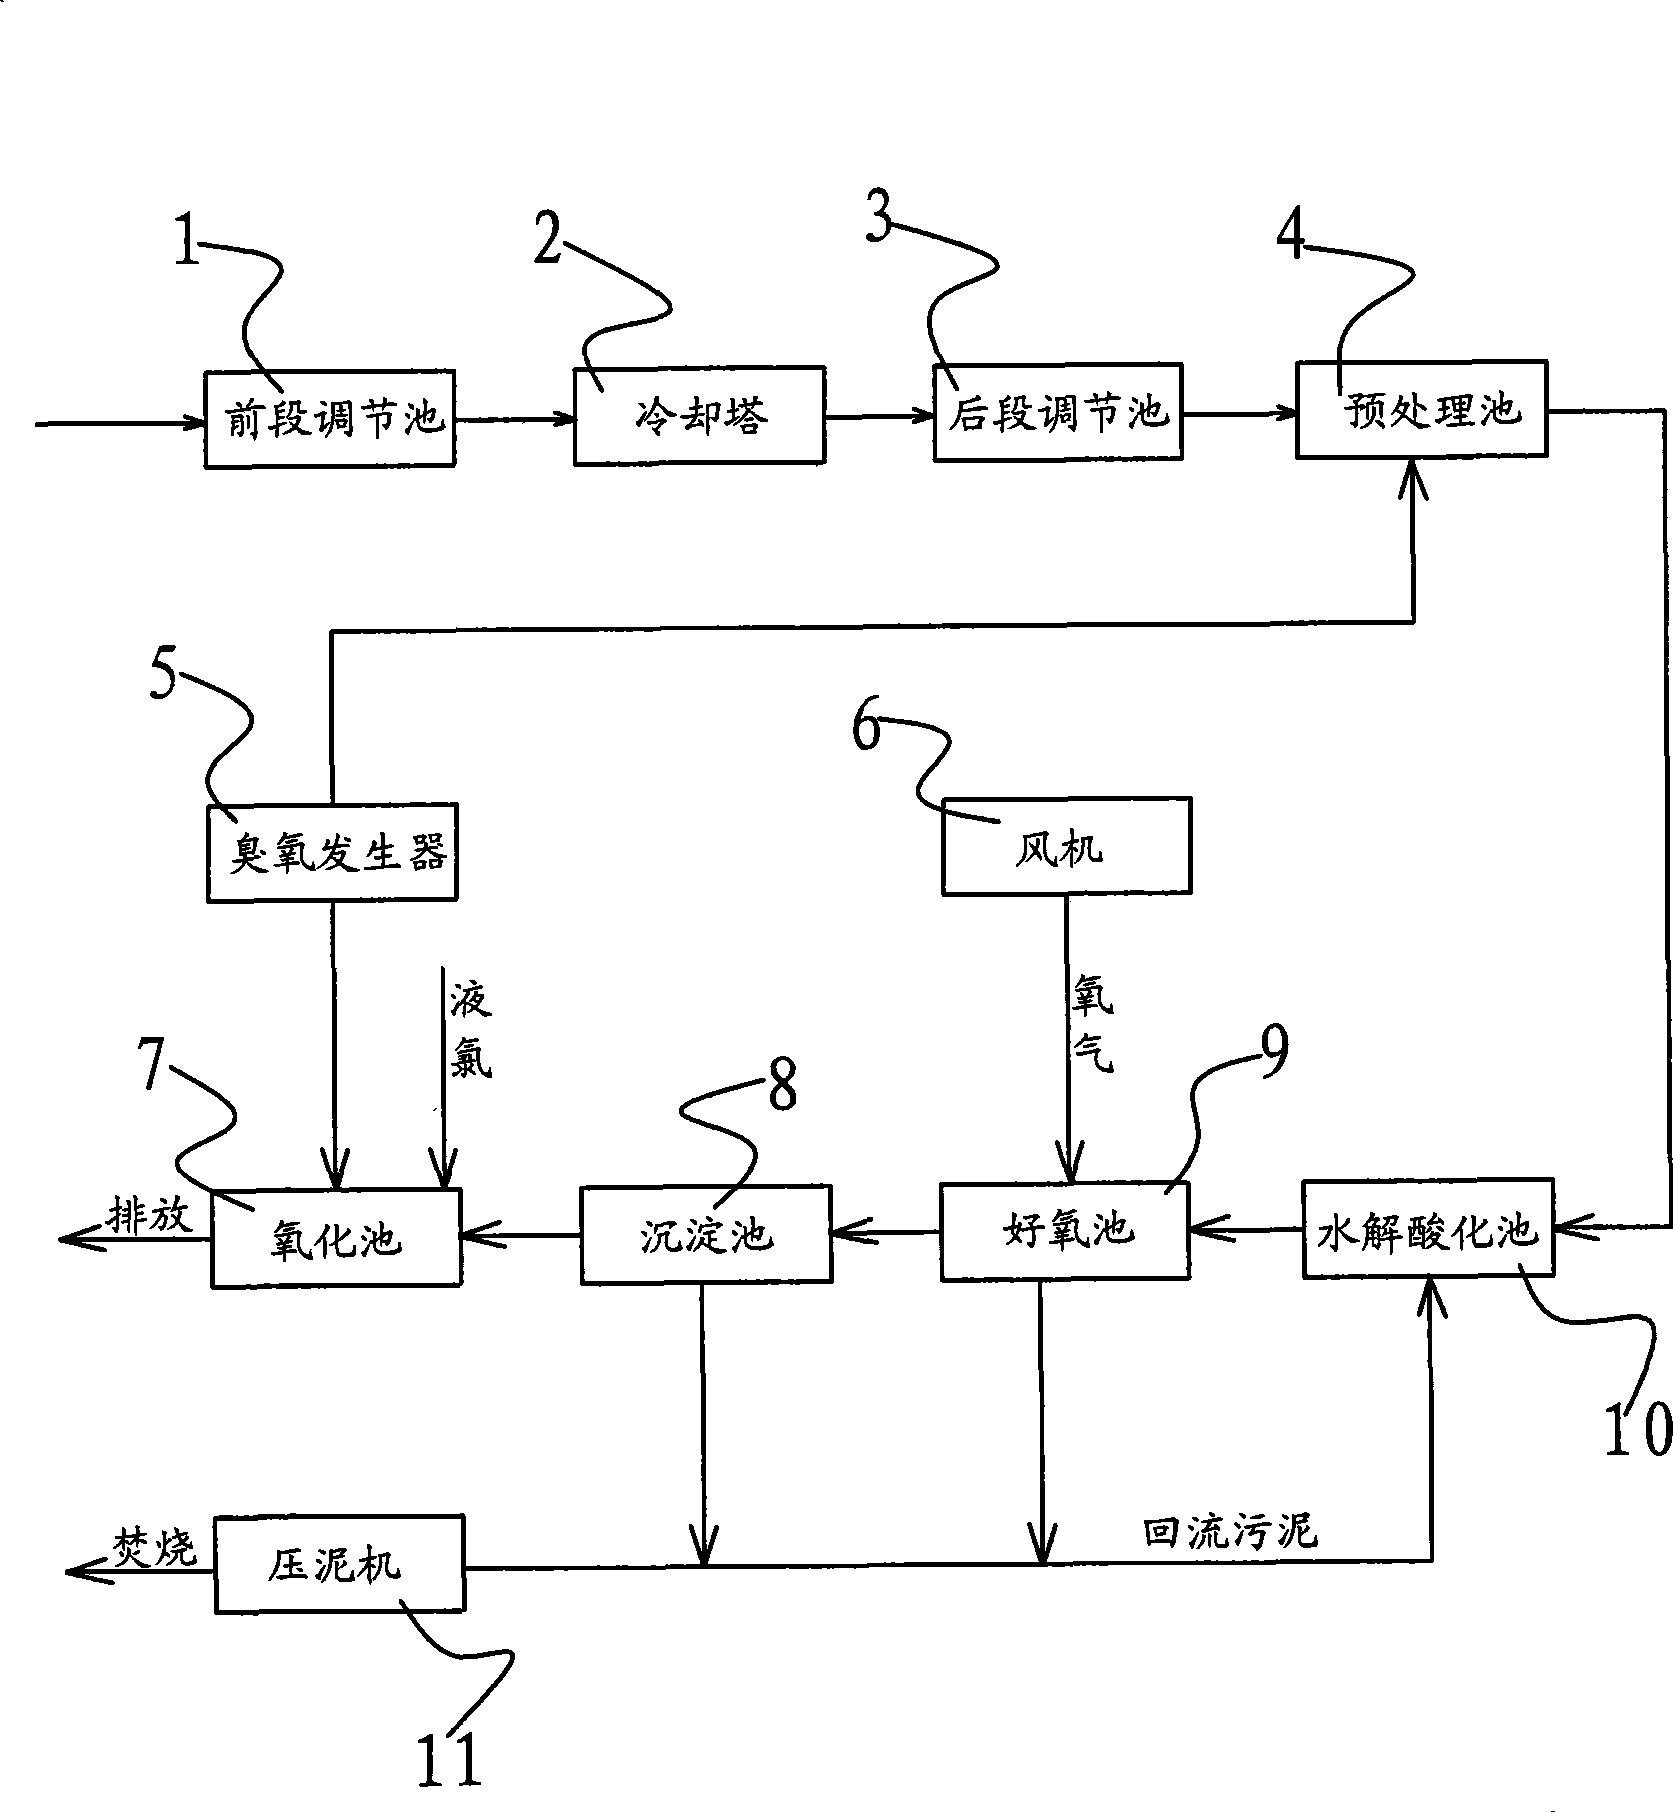 Method for treating printing and dyeing wastewater